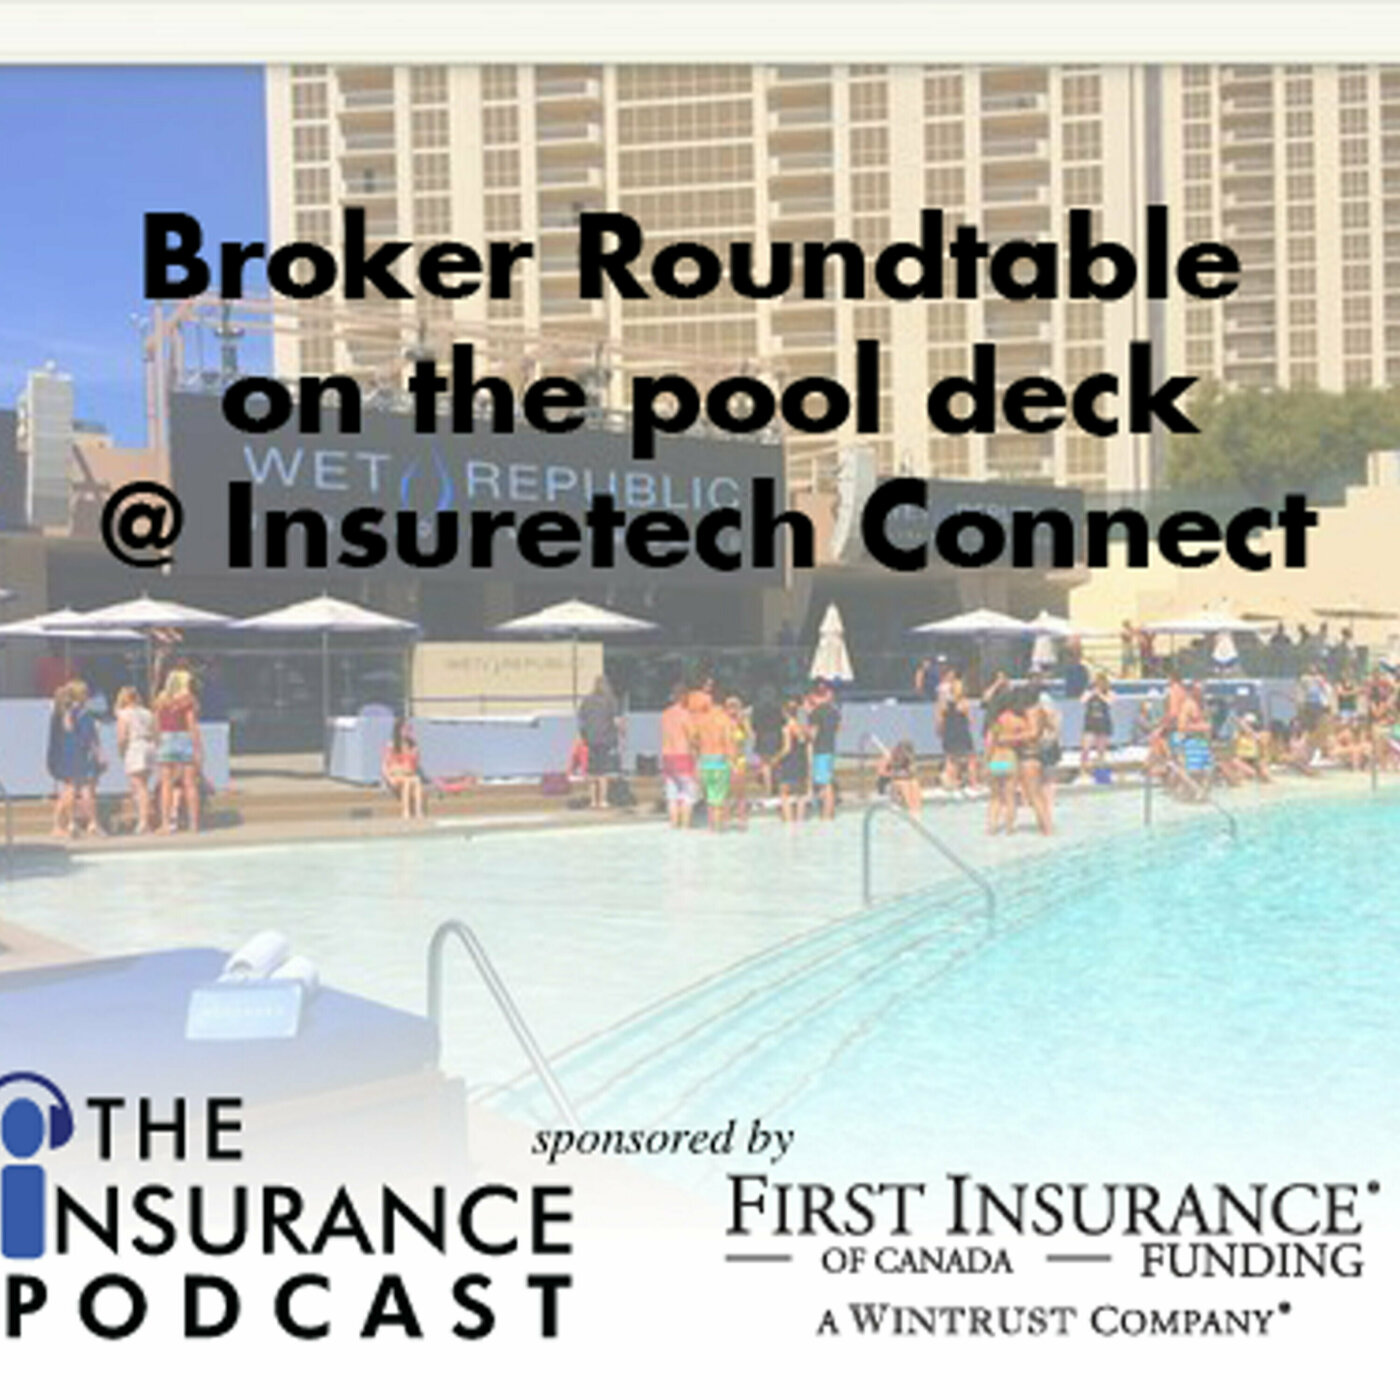 Broker Roundtable at Wet Republic Image